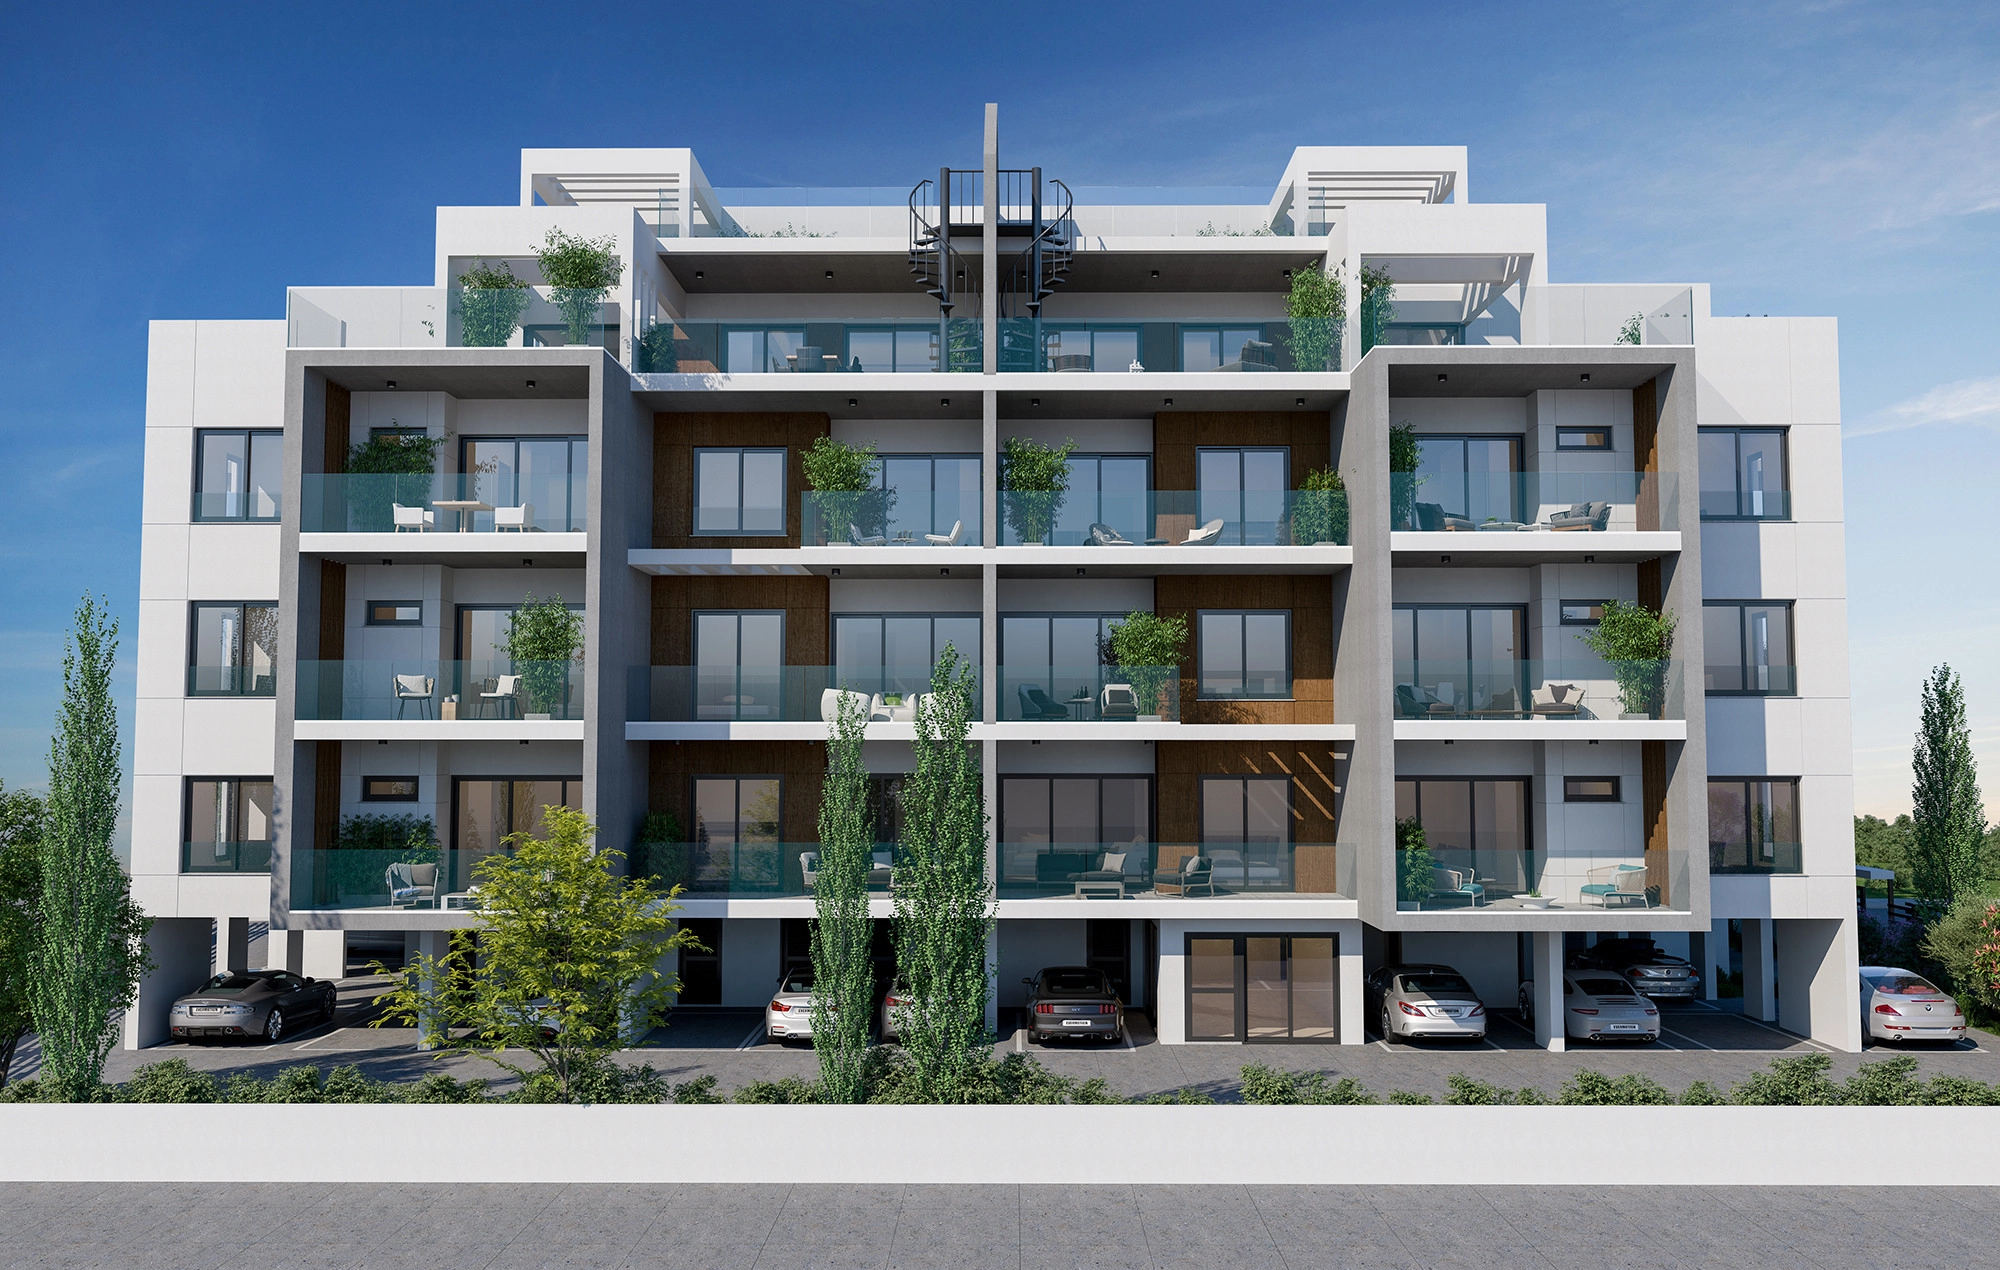 5 Bedroom Apartment for Sale in Limassol – Agios Athanasios